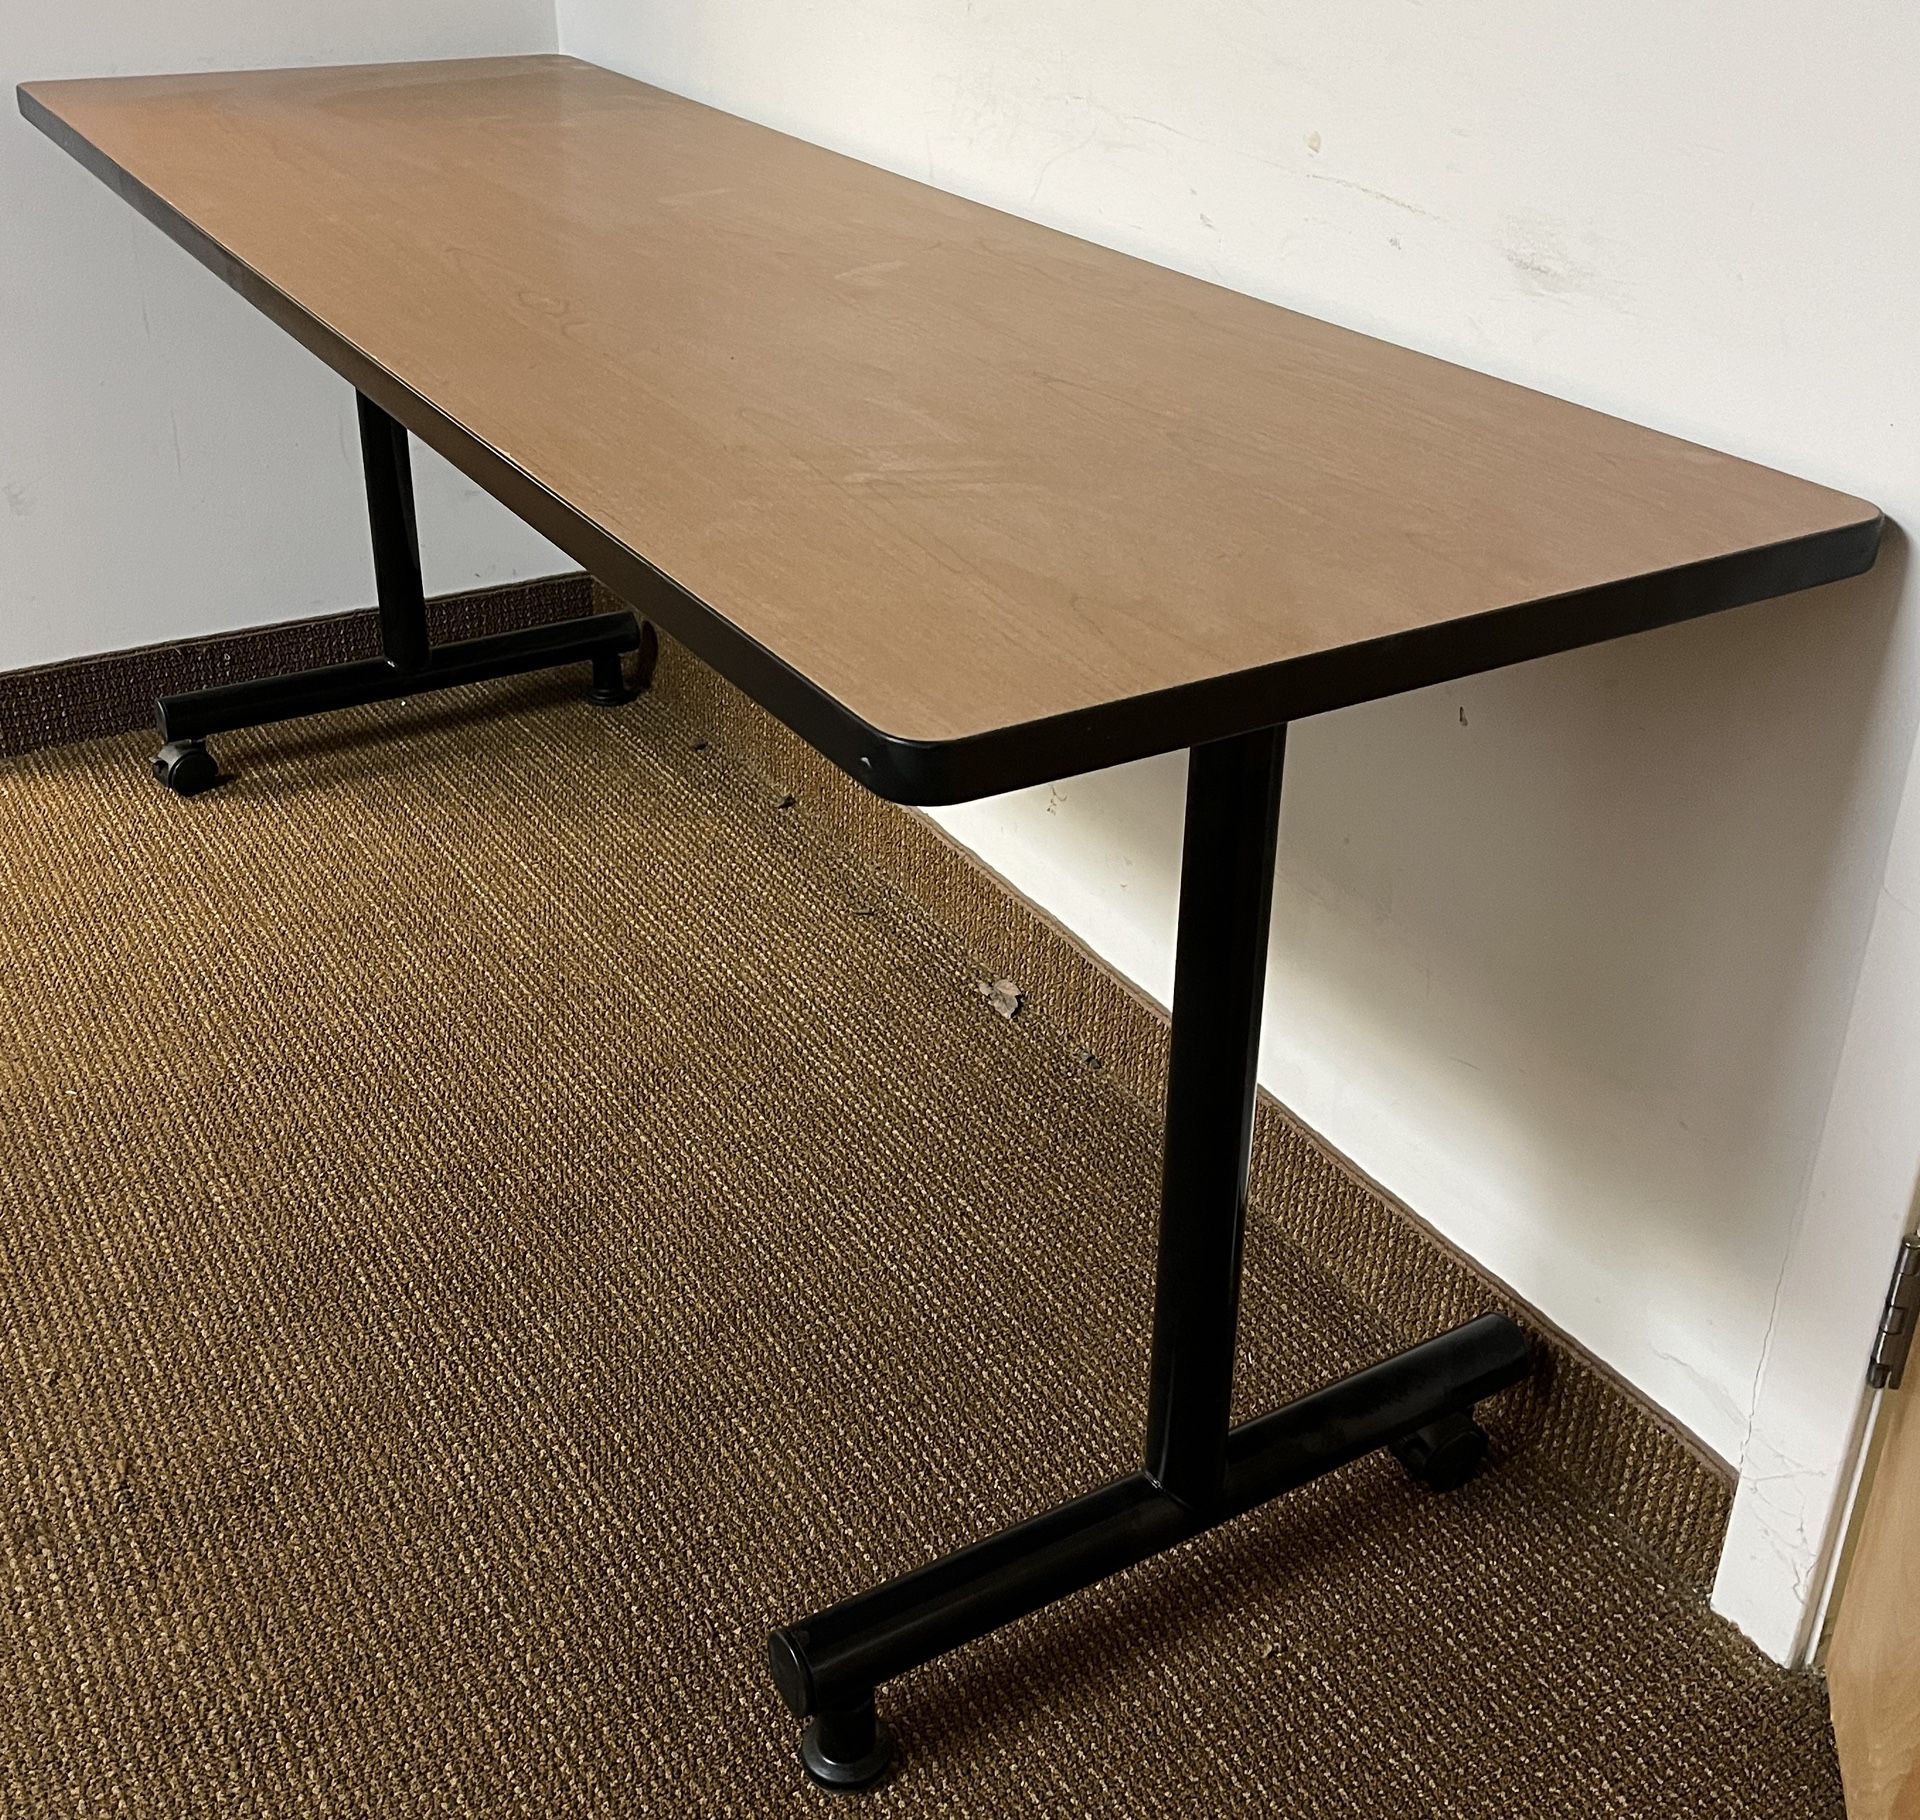 (3) Regency Kobe 72" x 24" Training Table. Office Desk Classroom Desk. $70 ea. $200 all 3.  Has some light scratches and scuffs 